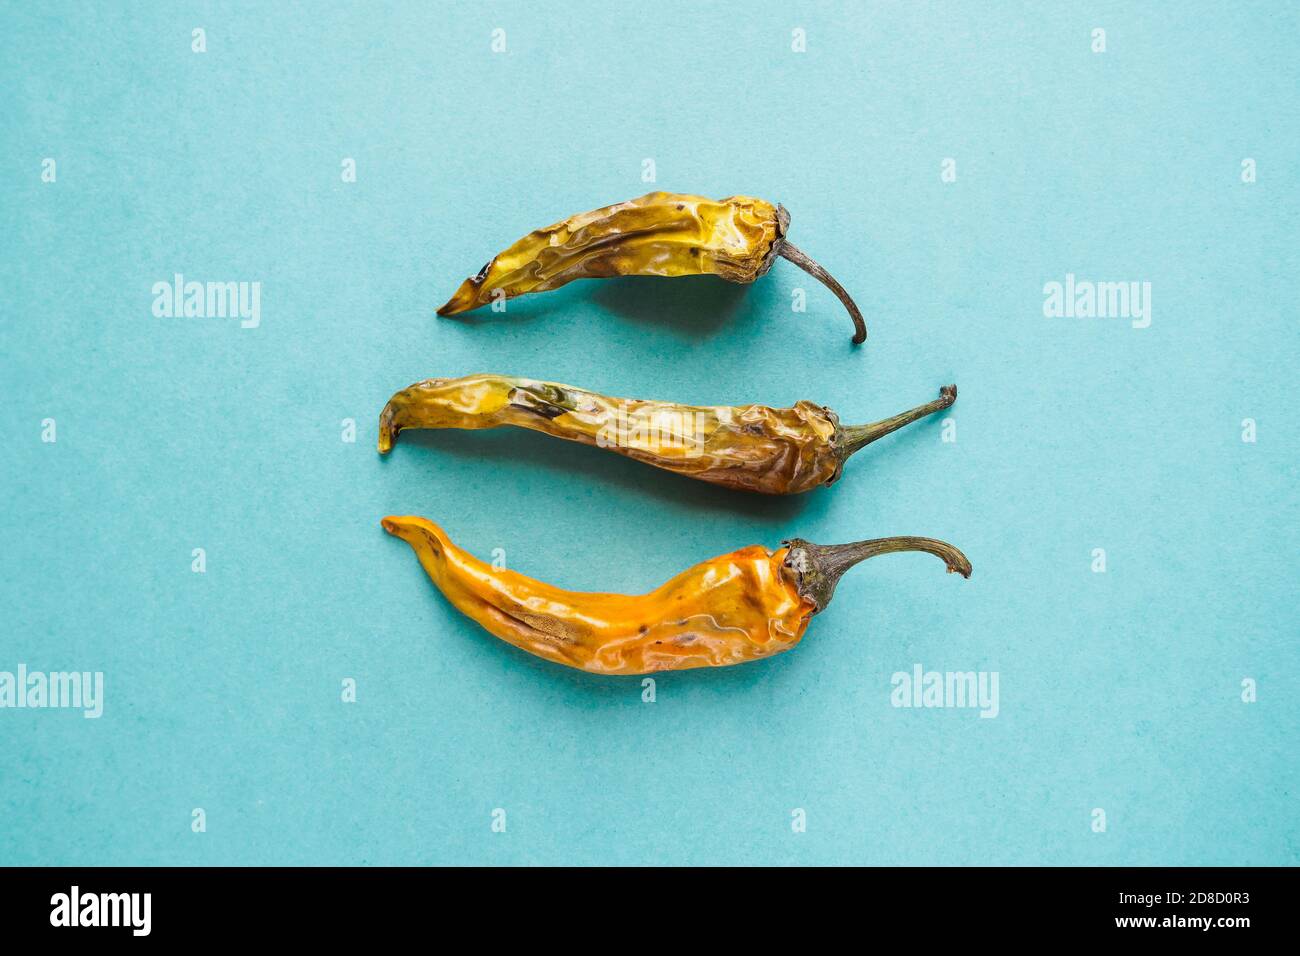 three old dried and spoiled yellow peppers on blue background, top view Stock Photo